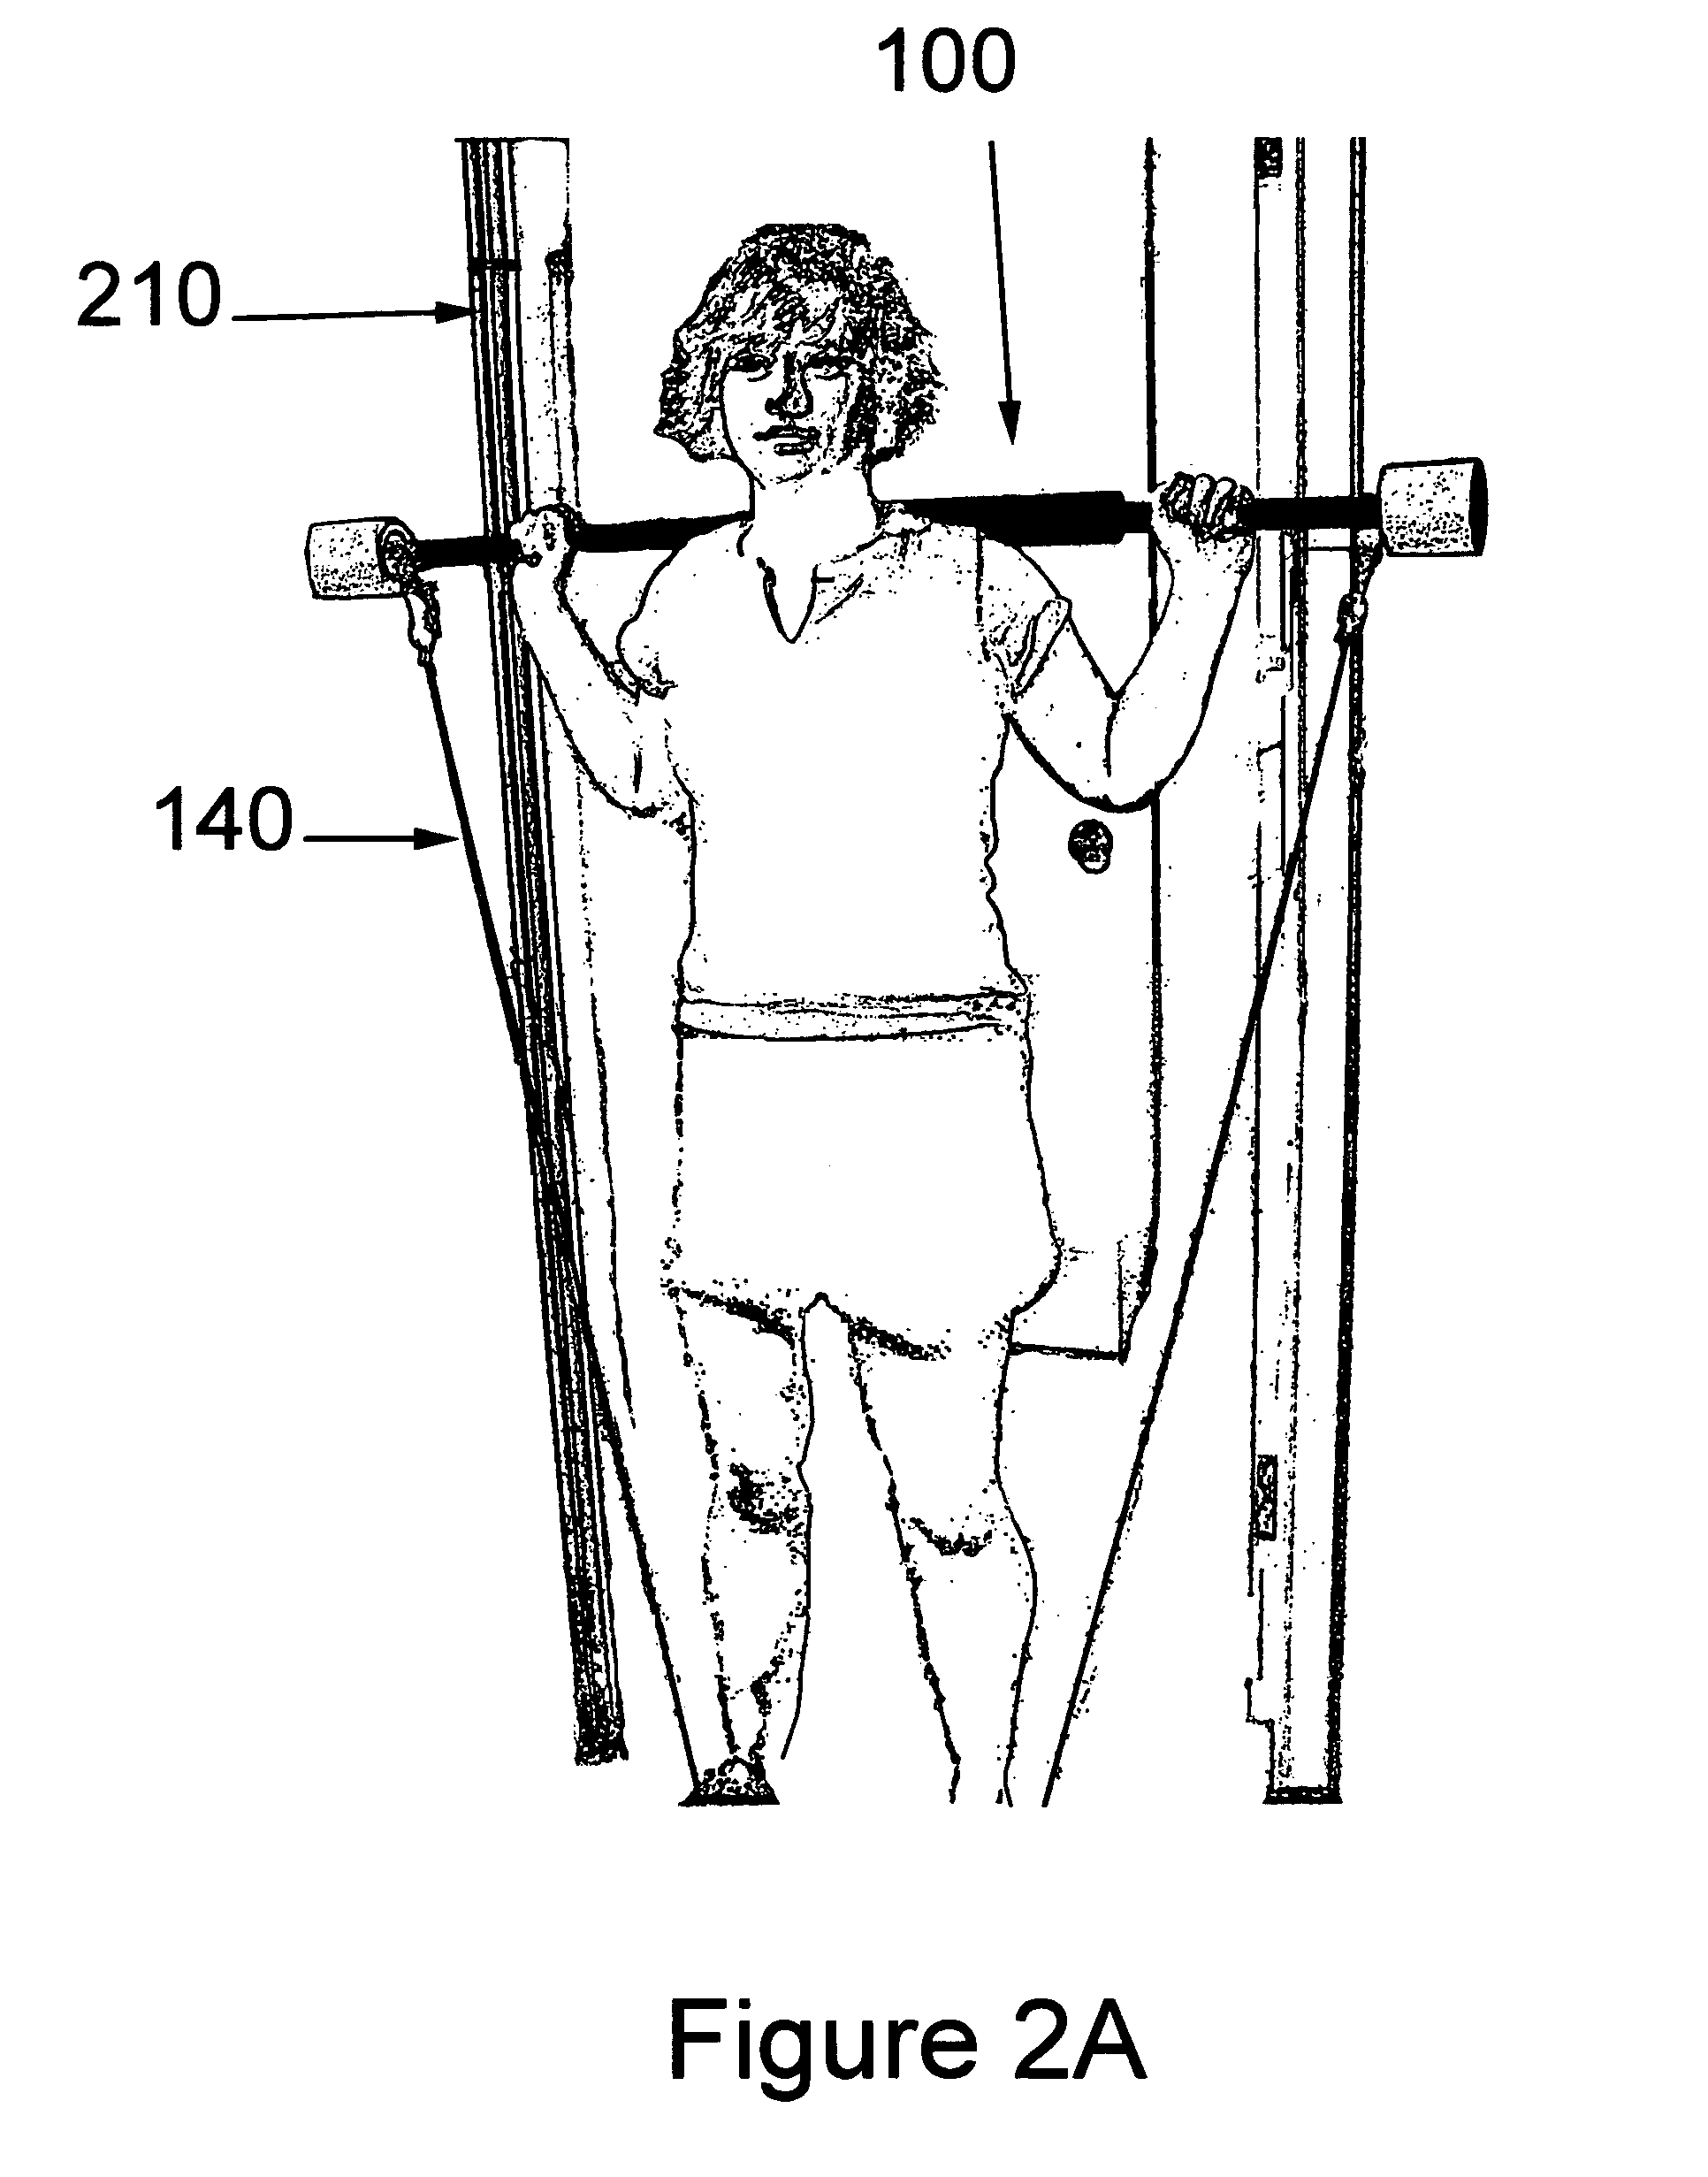 Exercise roll bar device